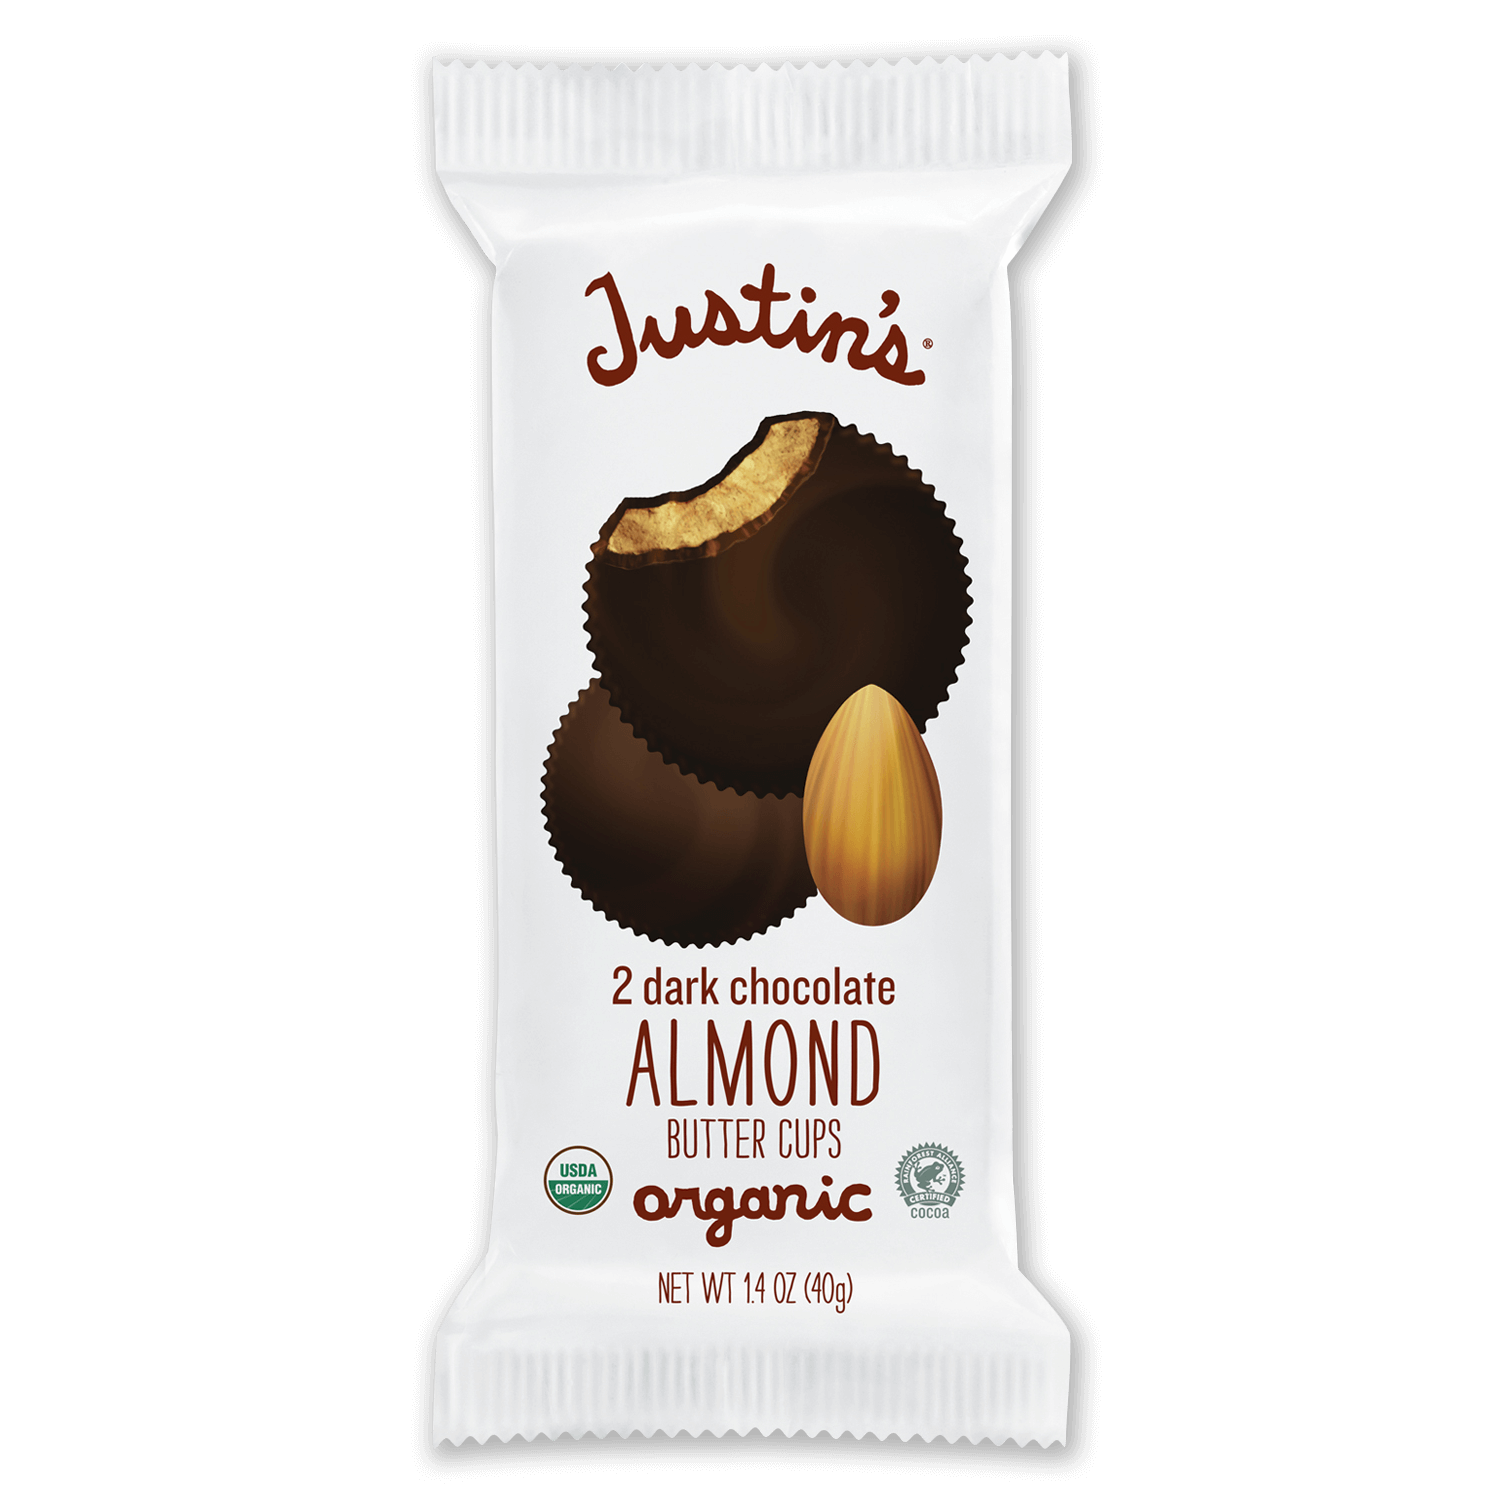 Justin's Dark Chocolate Almond Butter Cups 2-piece packages 1.4 oz.